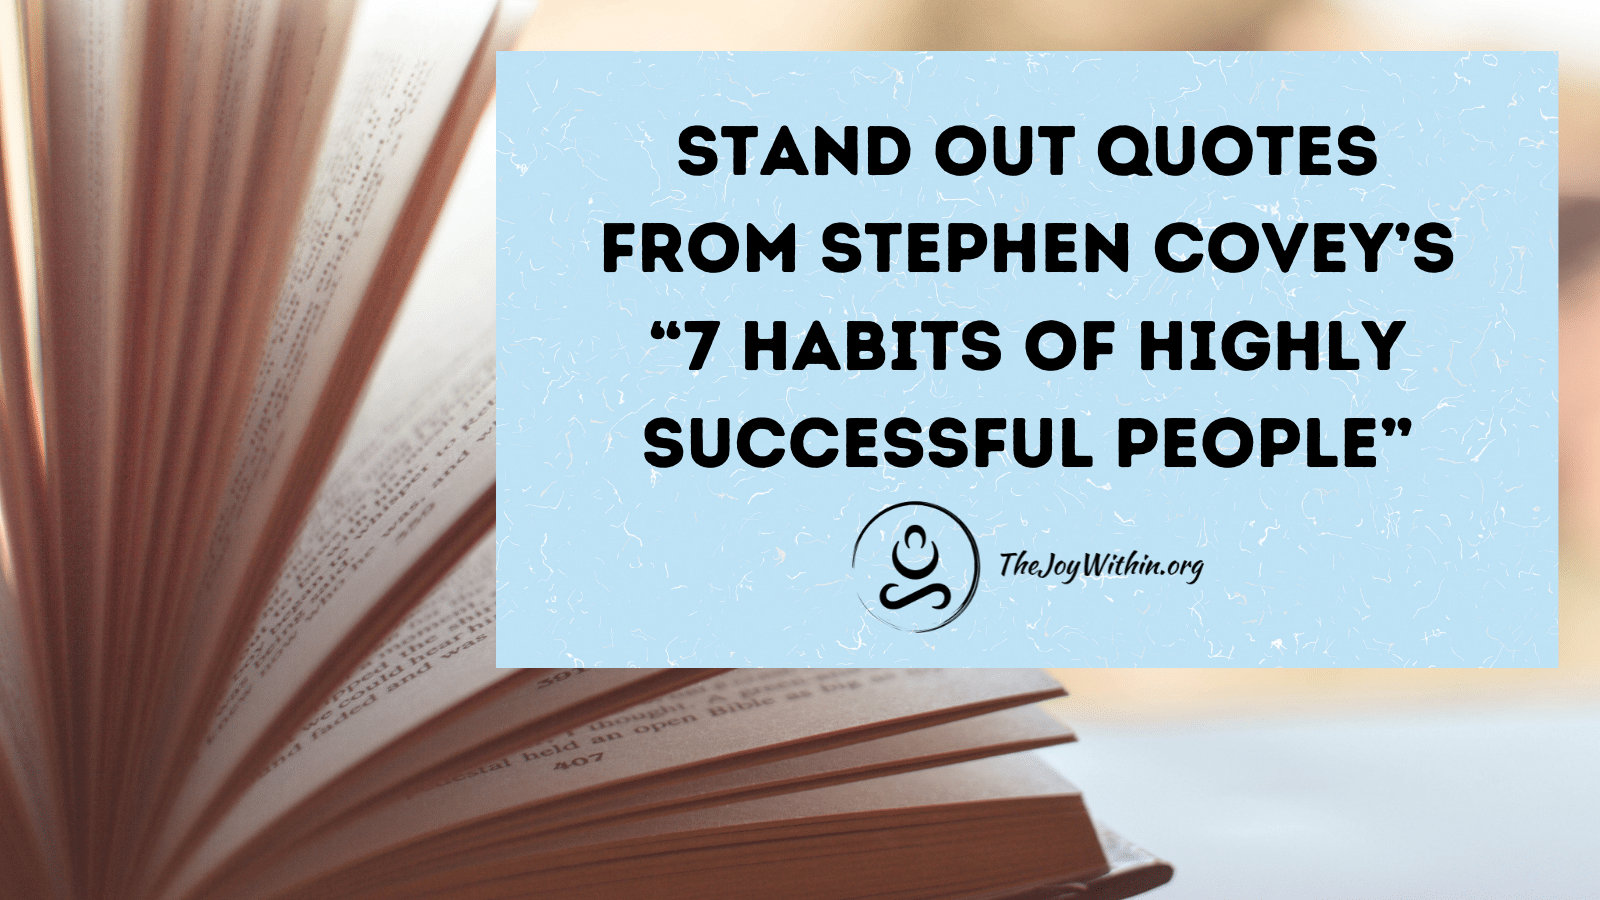 You are currently viewing Stand Out Quotes from Stephen Covey’s “7 Habits of Highly Successful People”